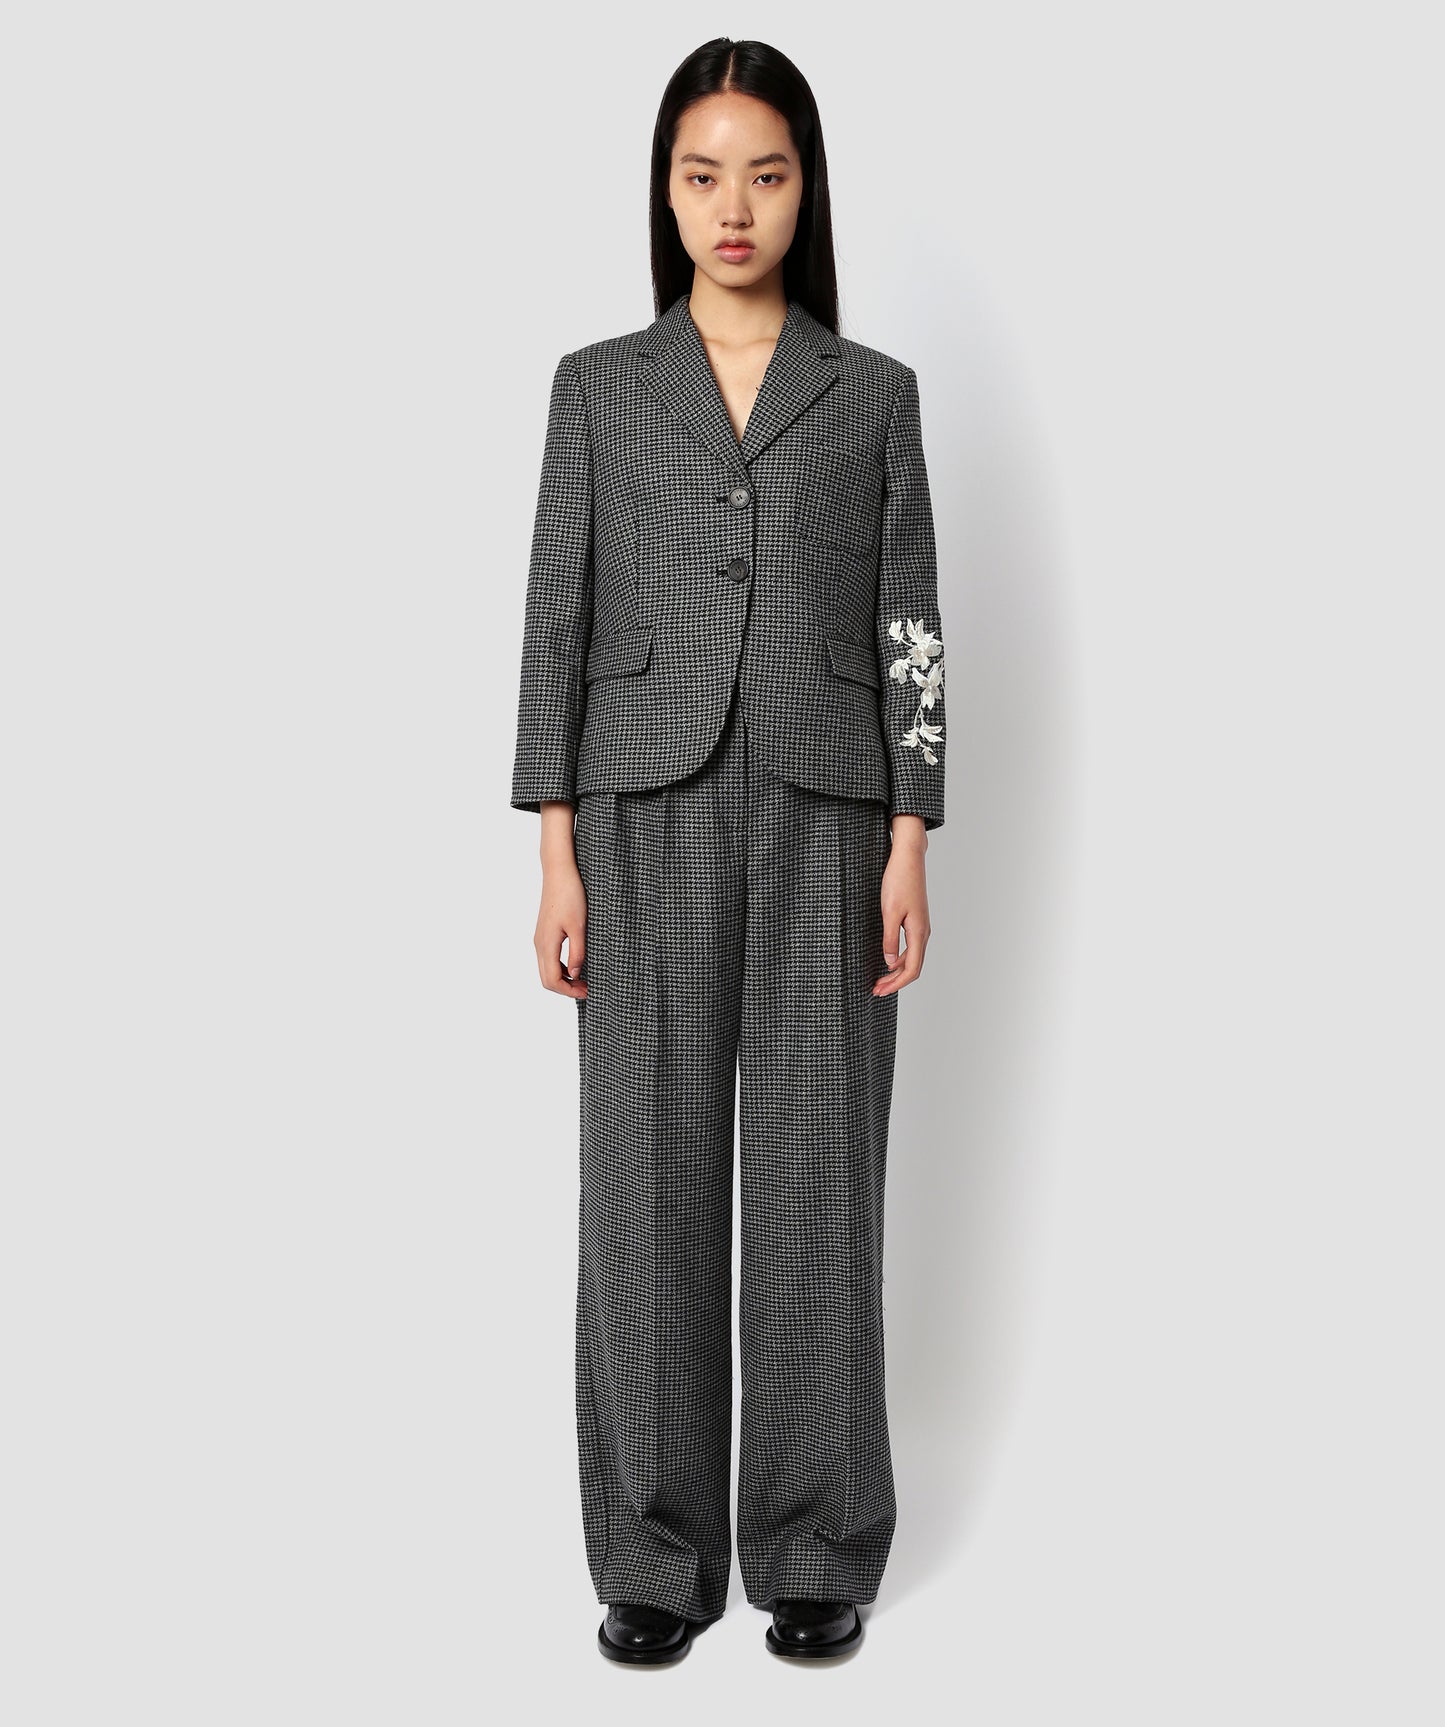 Tailored Wool Wide Leg Trousers With Darts